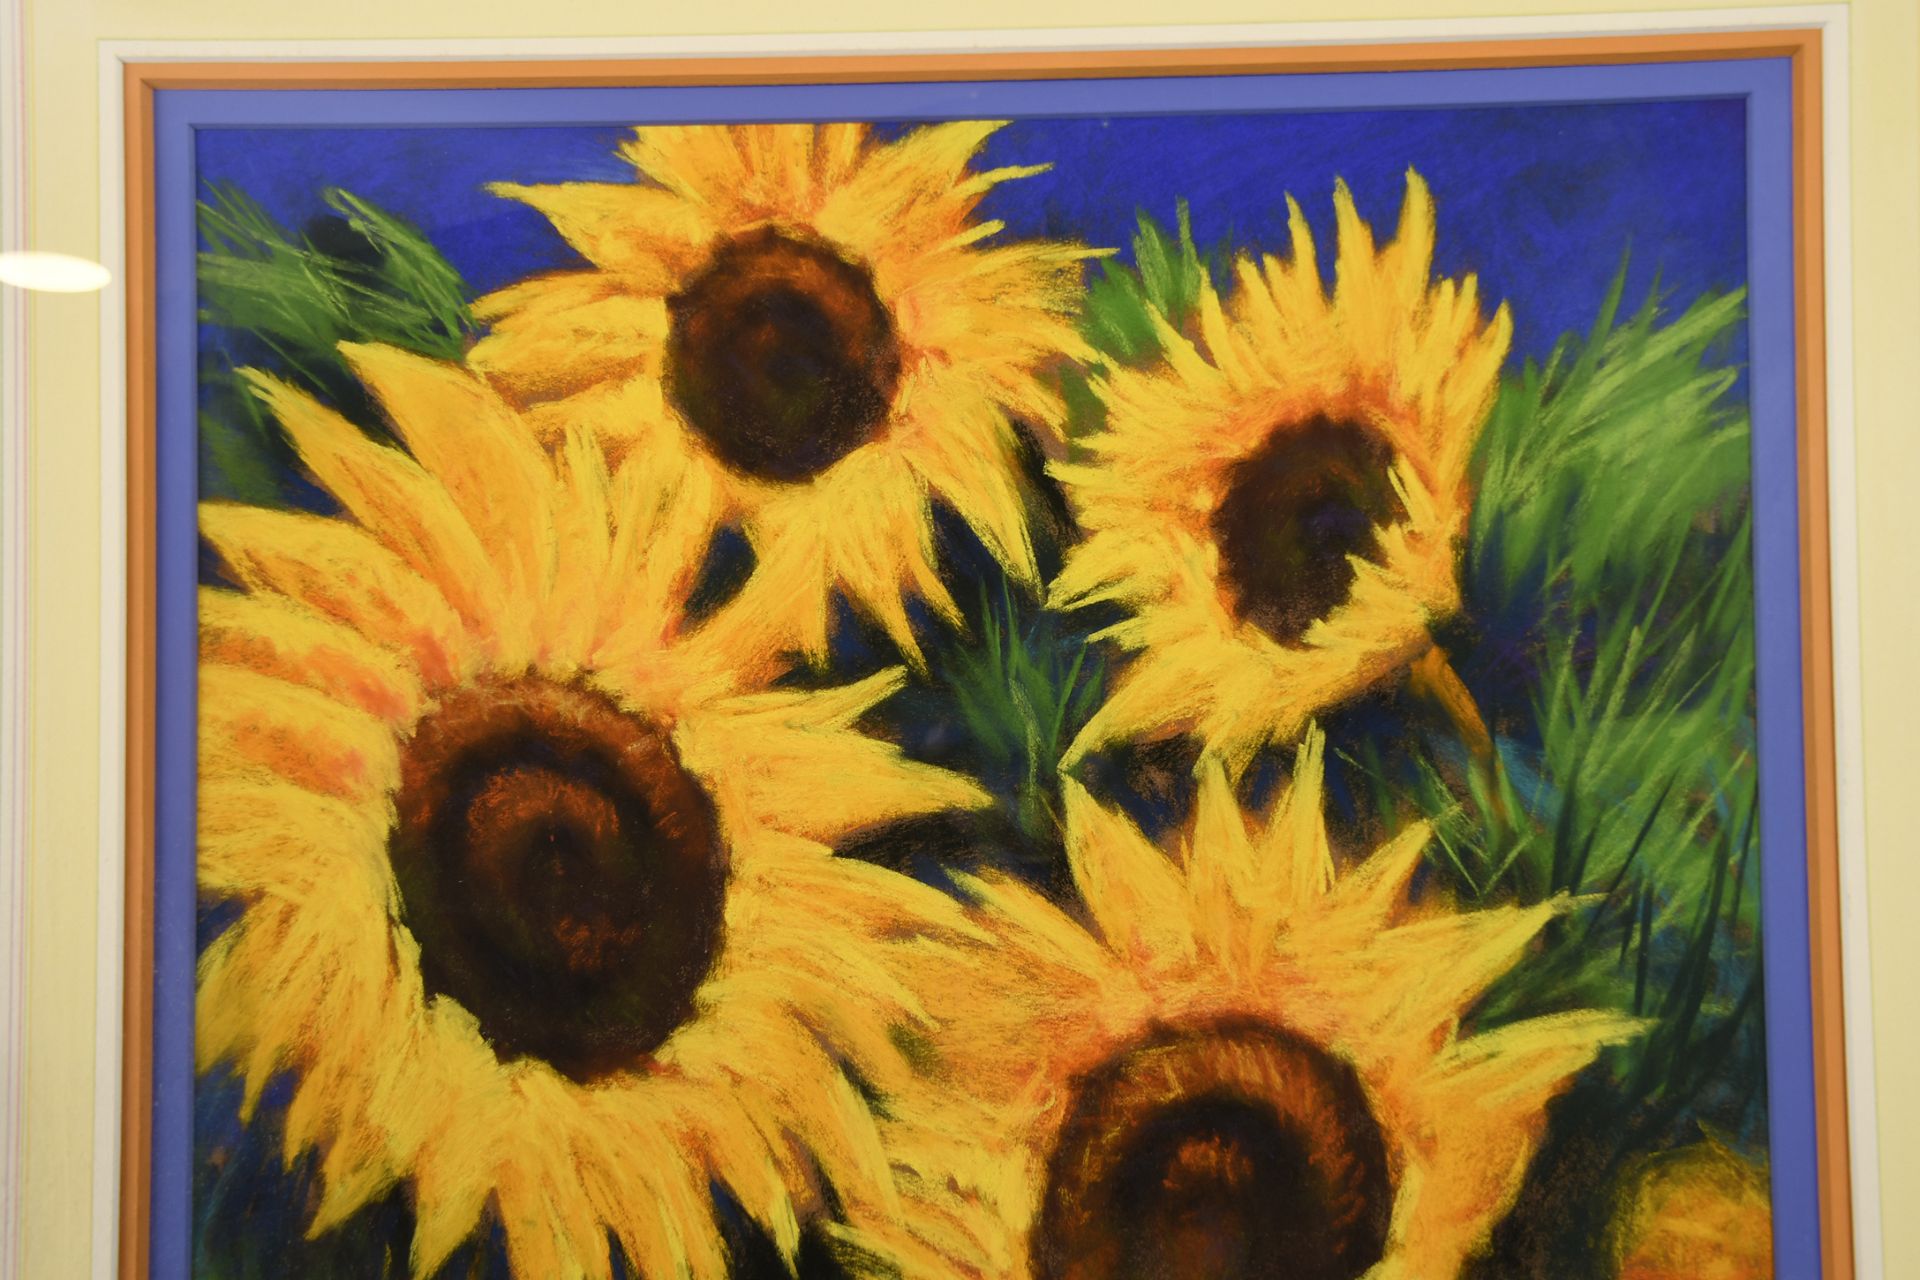 Anthony Orme "Sunflowers" Painting - Image 4 of 6